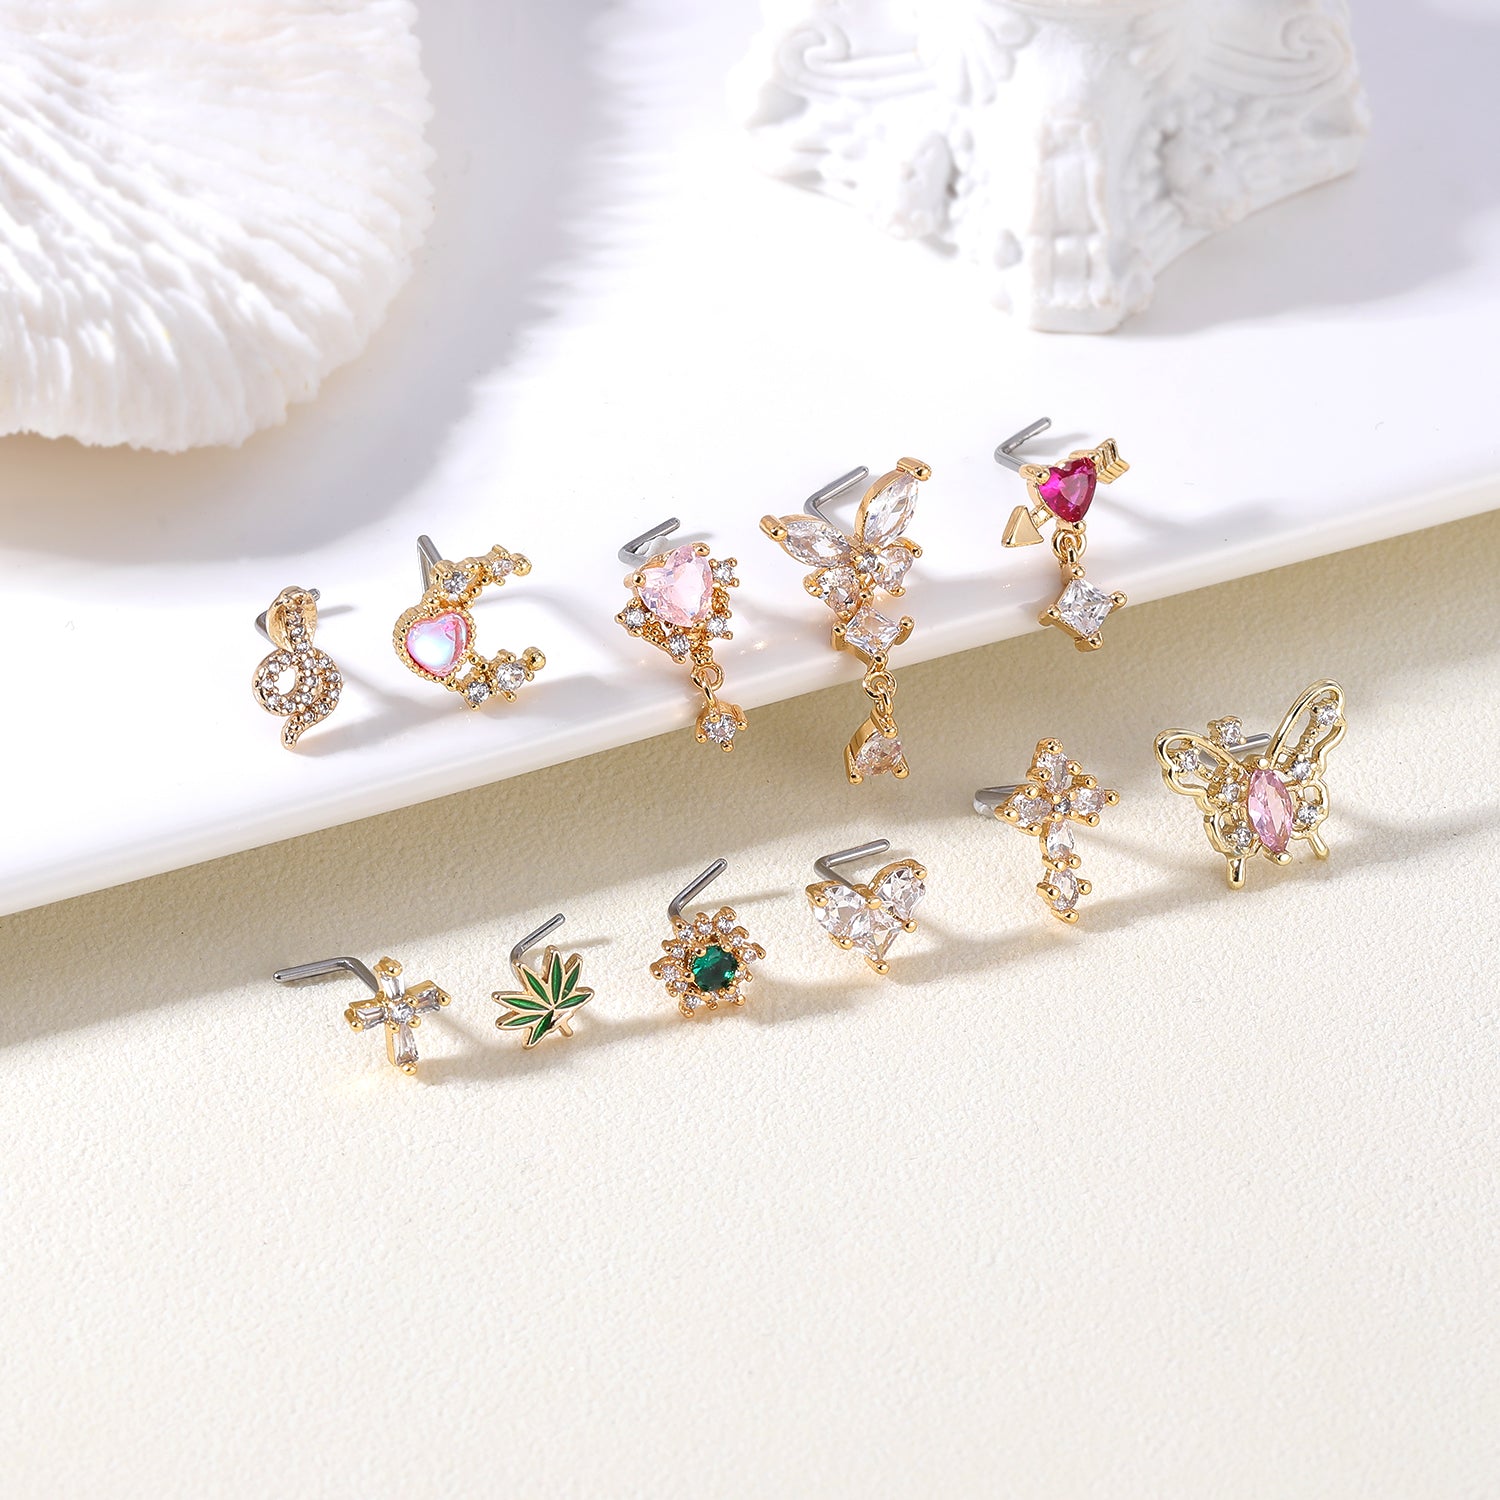 20G-Cross-White-Zircon-Nose-Studs-Piercing-L-Shape-Nose-Rings-Gold-Silver-Plated-Nostril-Piercing